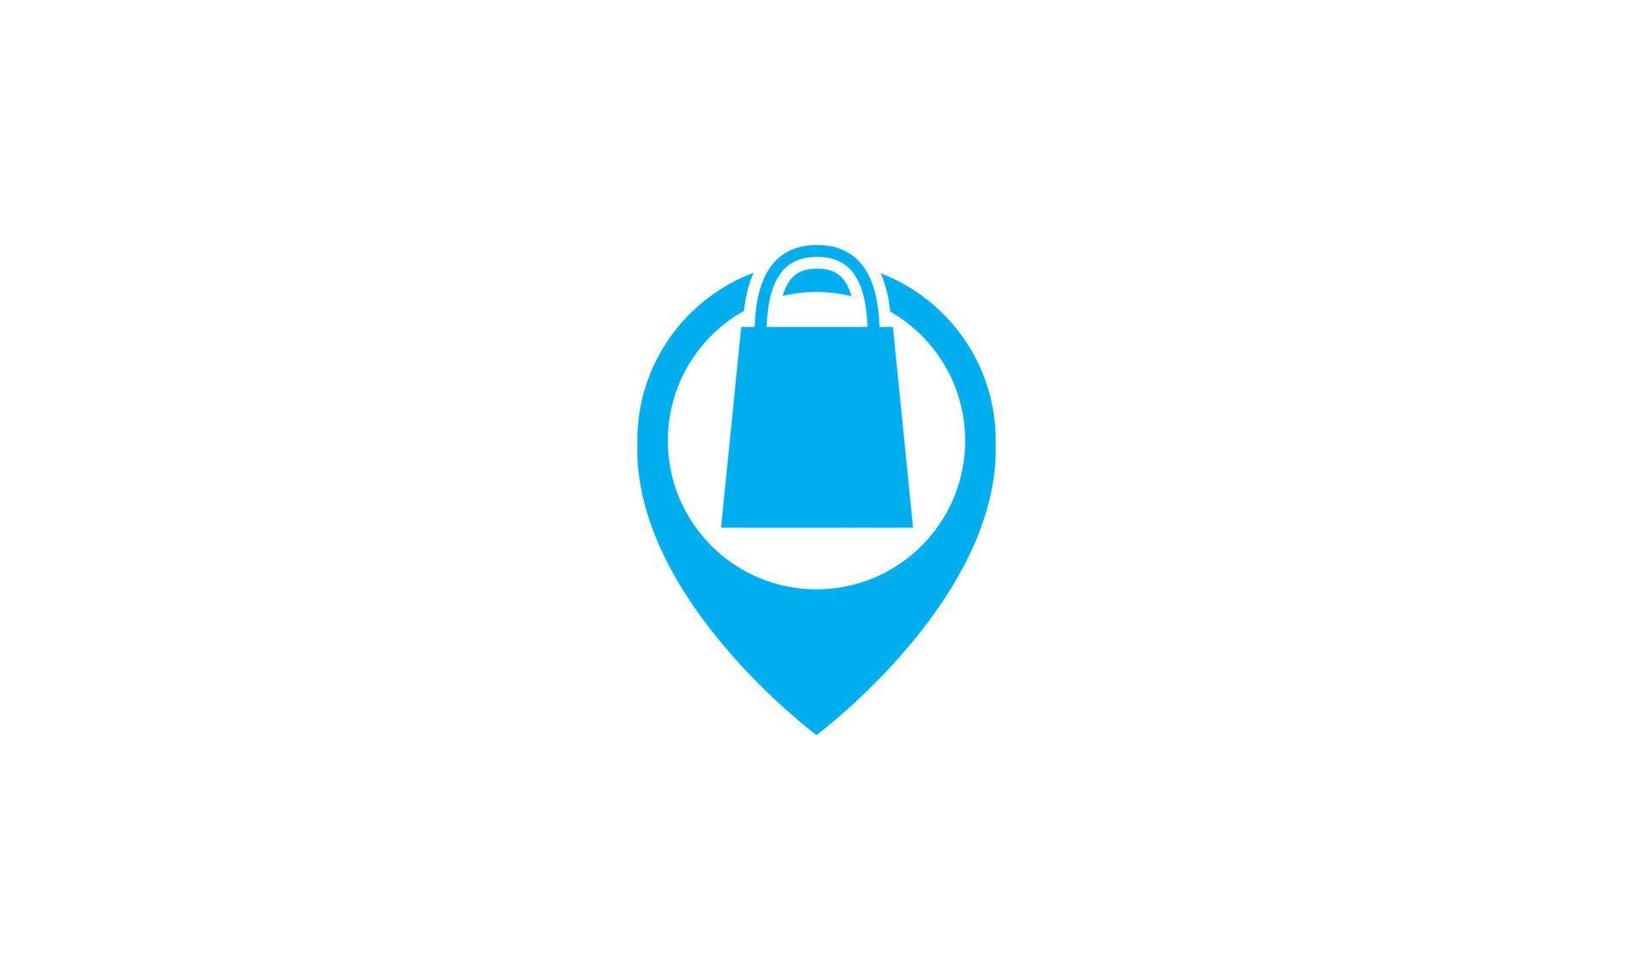 shopping bag with pin map location logo symbol icon vector graphic design illustration